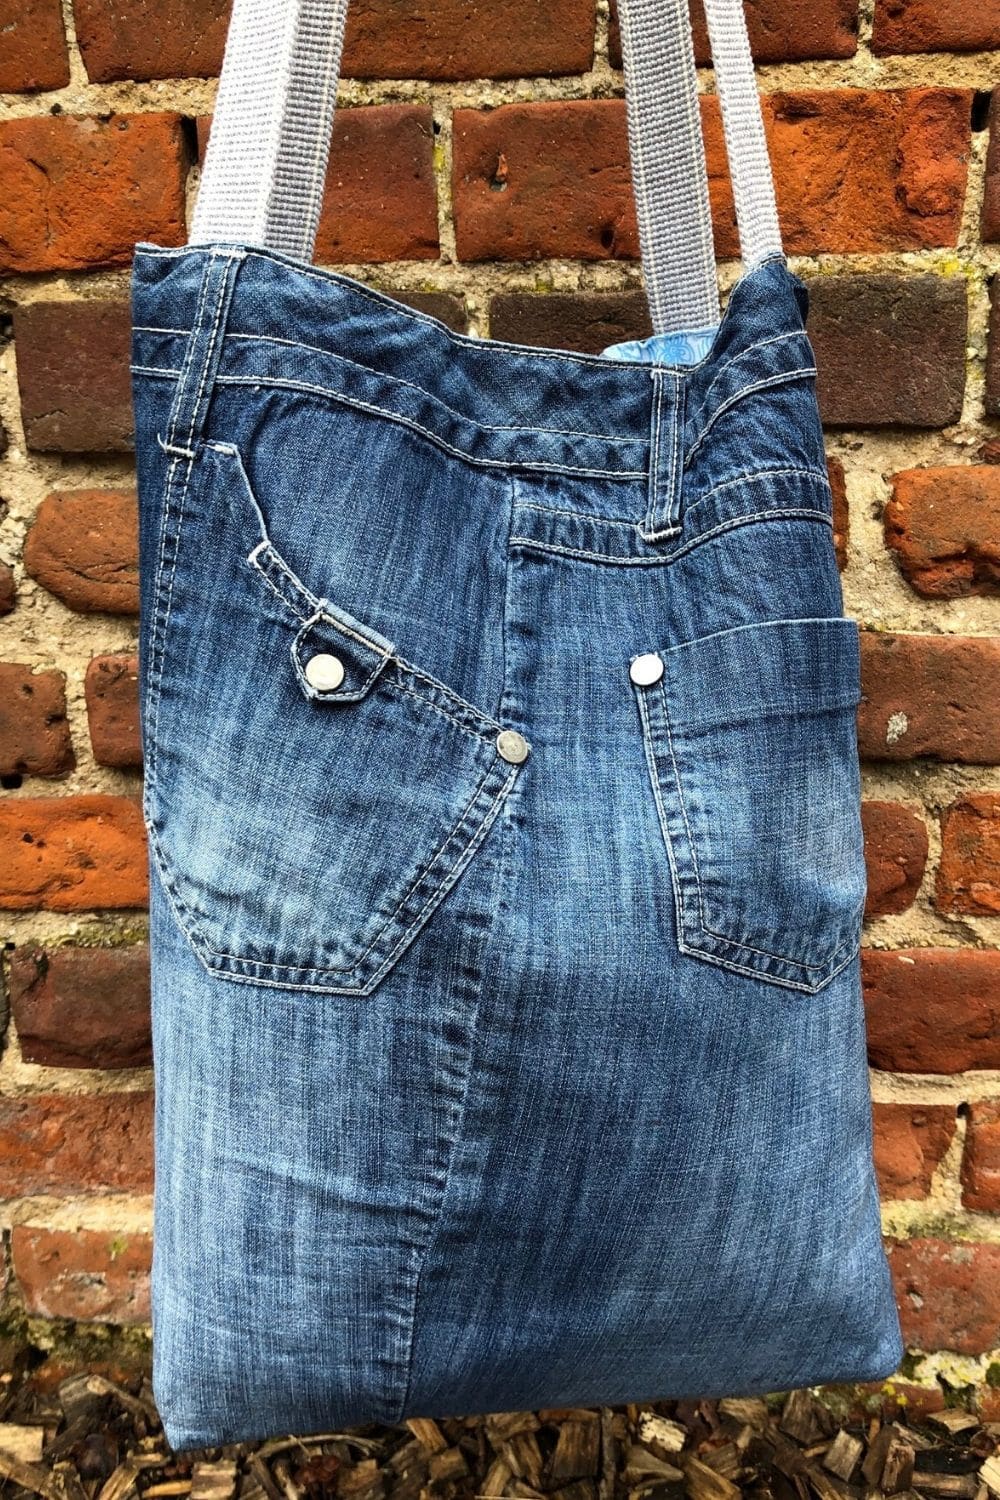 Making bags out of old jeans is super fun. Learn how with this quick and easy recycled denim bags pattern with video